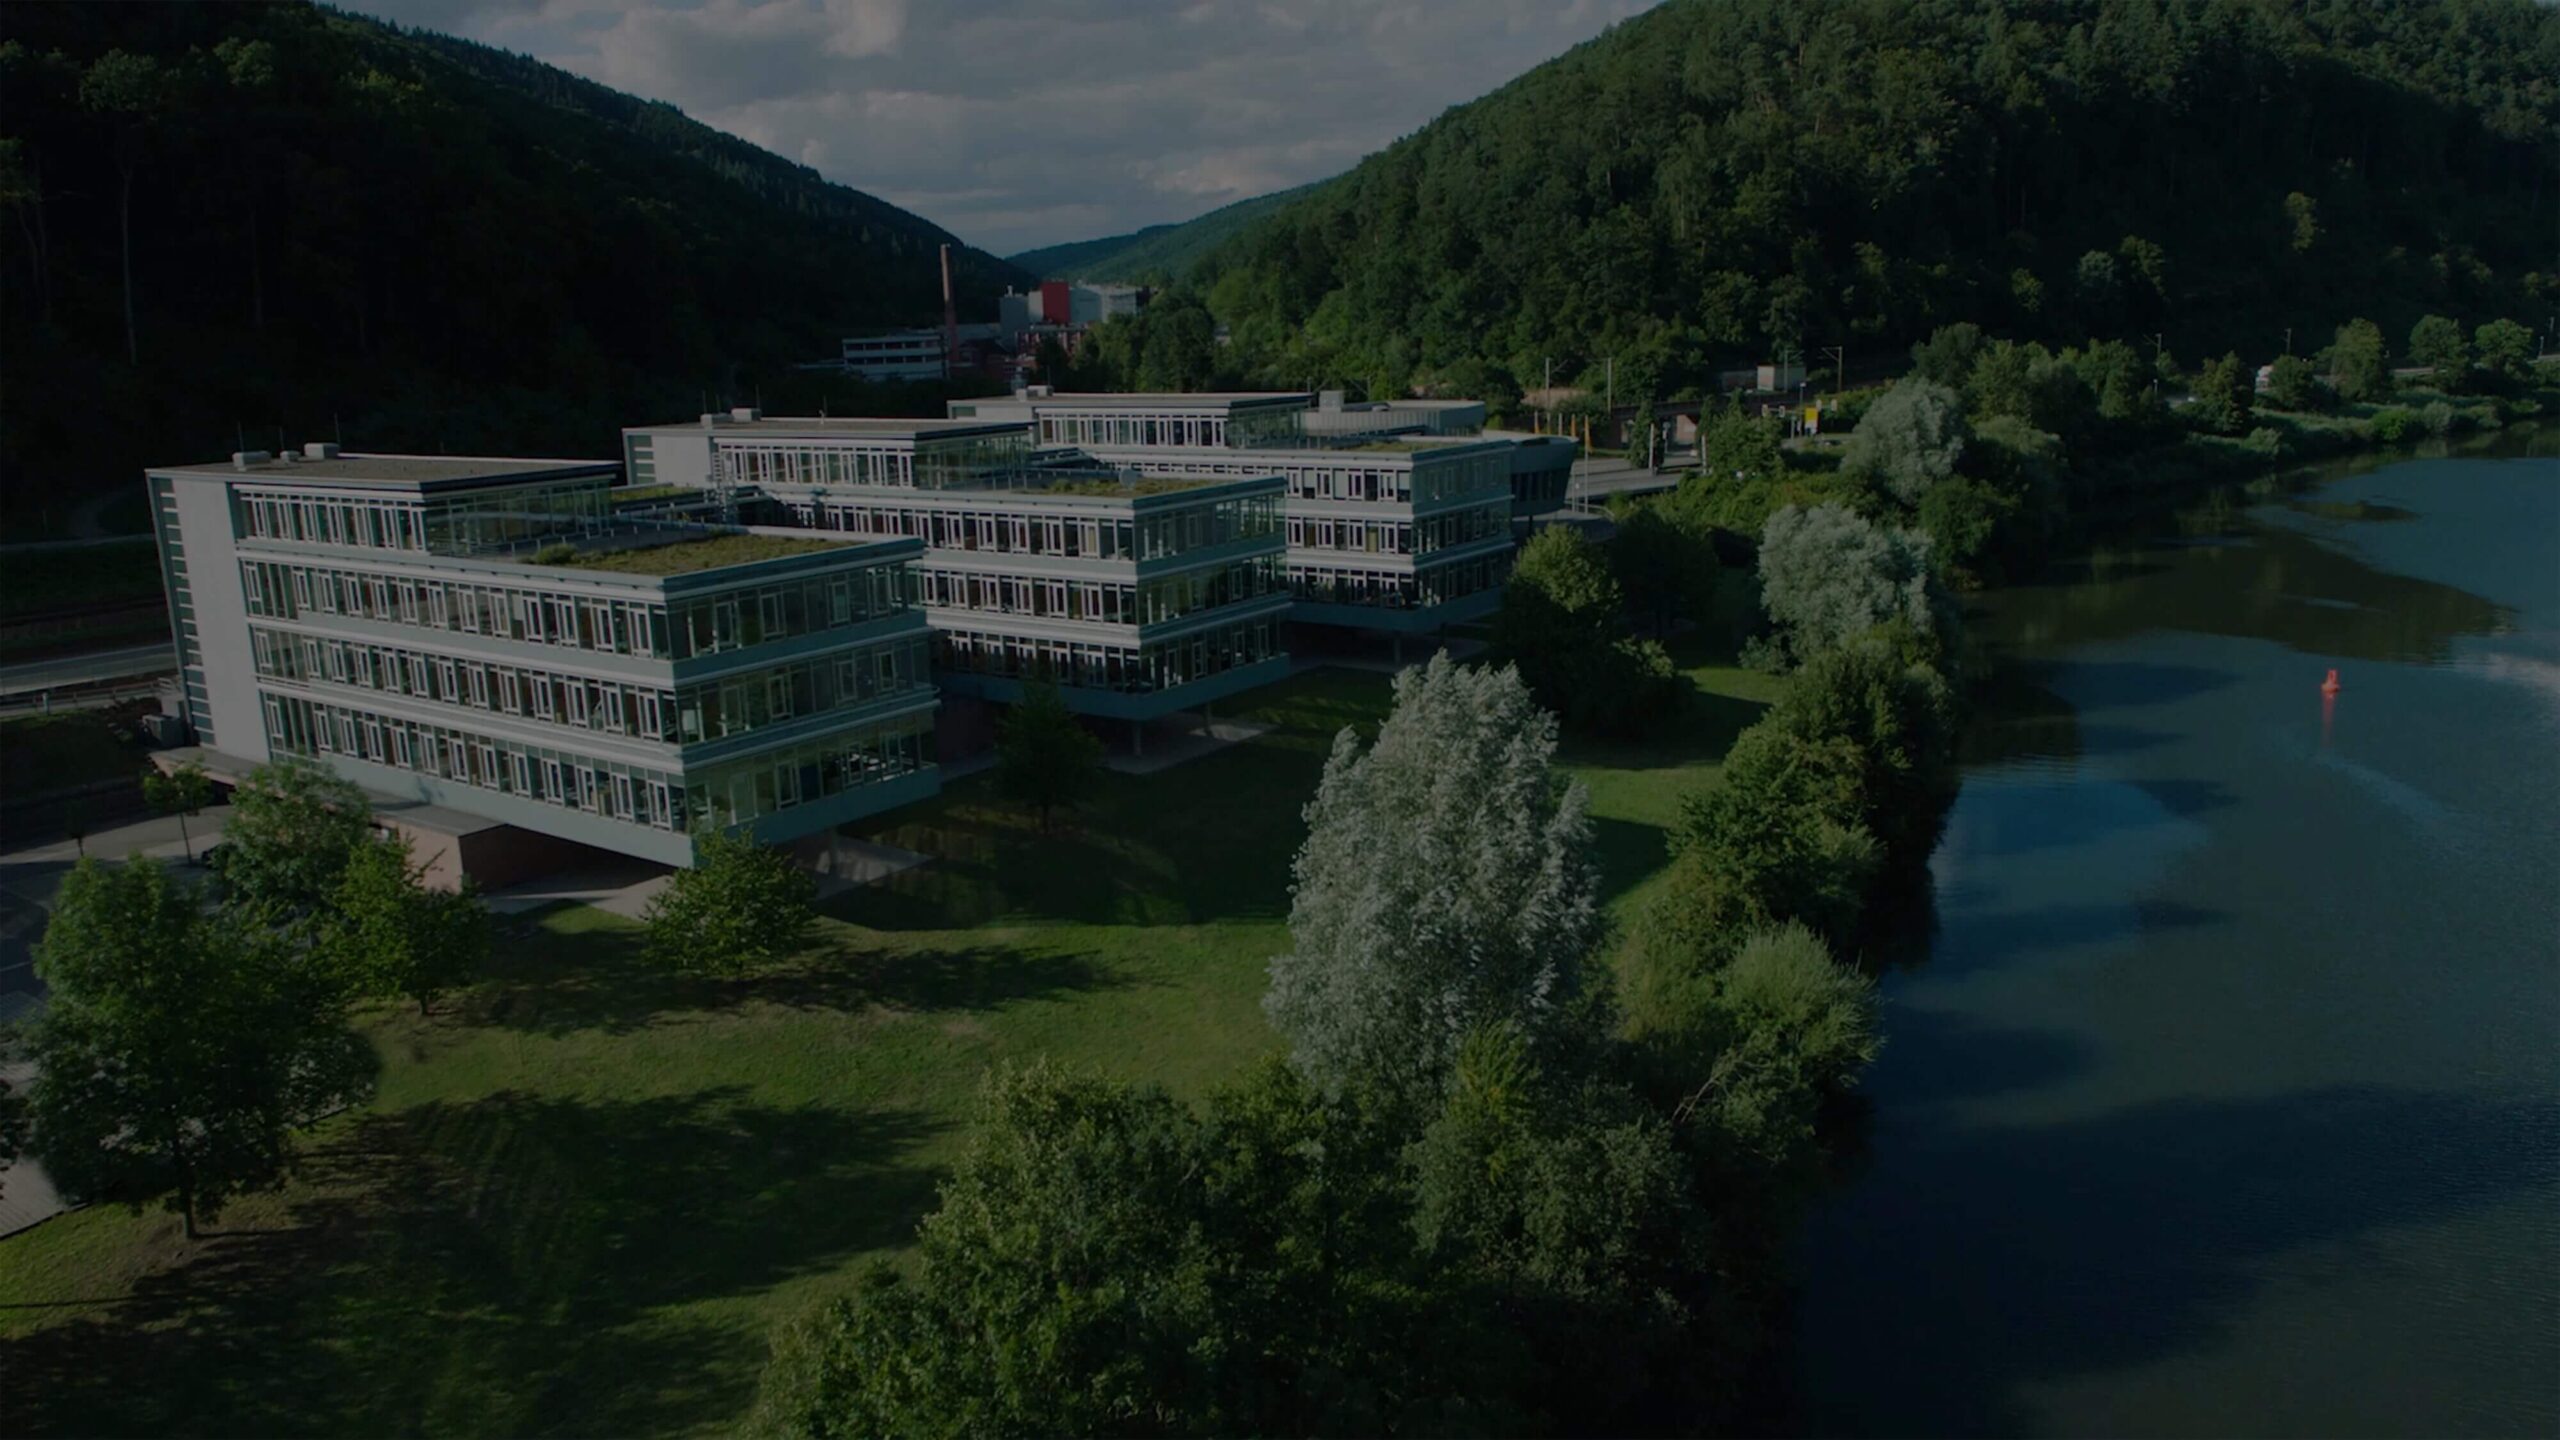 The GELITA office buildings in the valley of Eberbach.